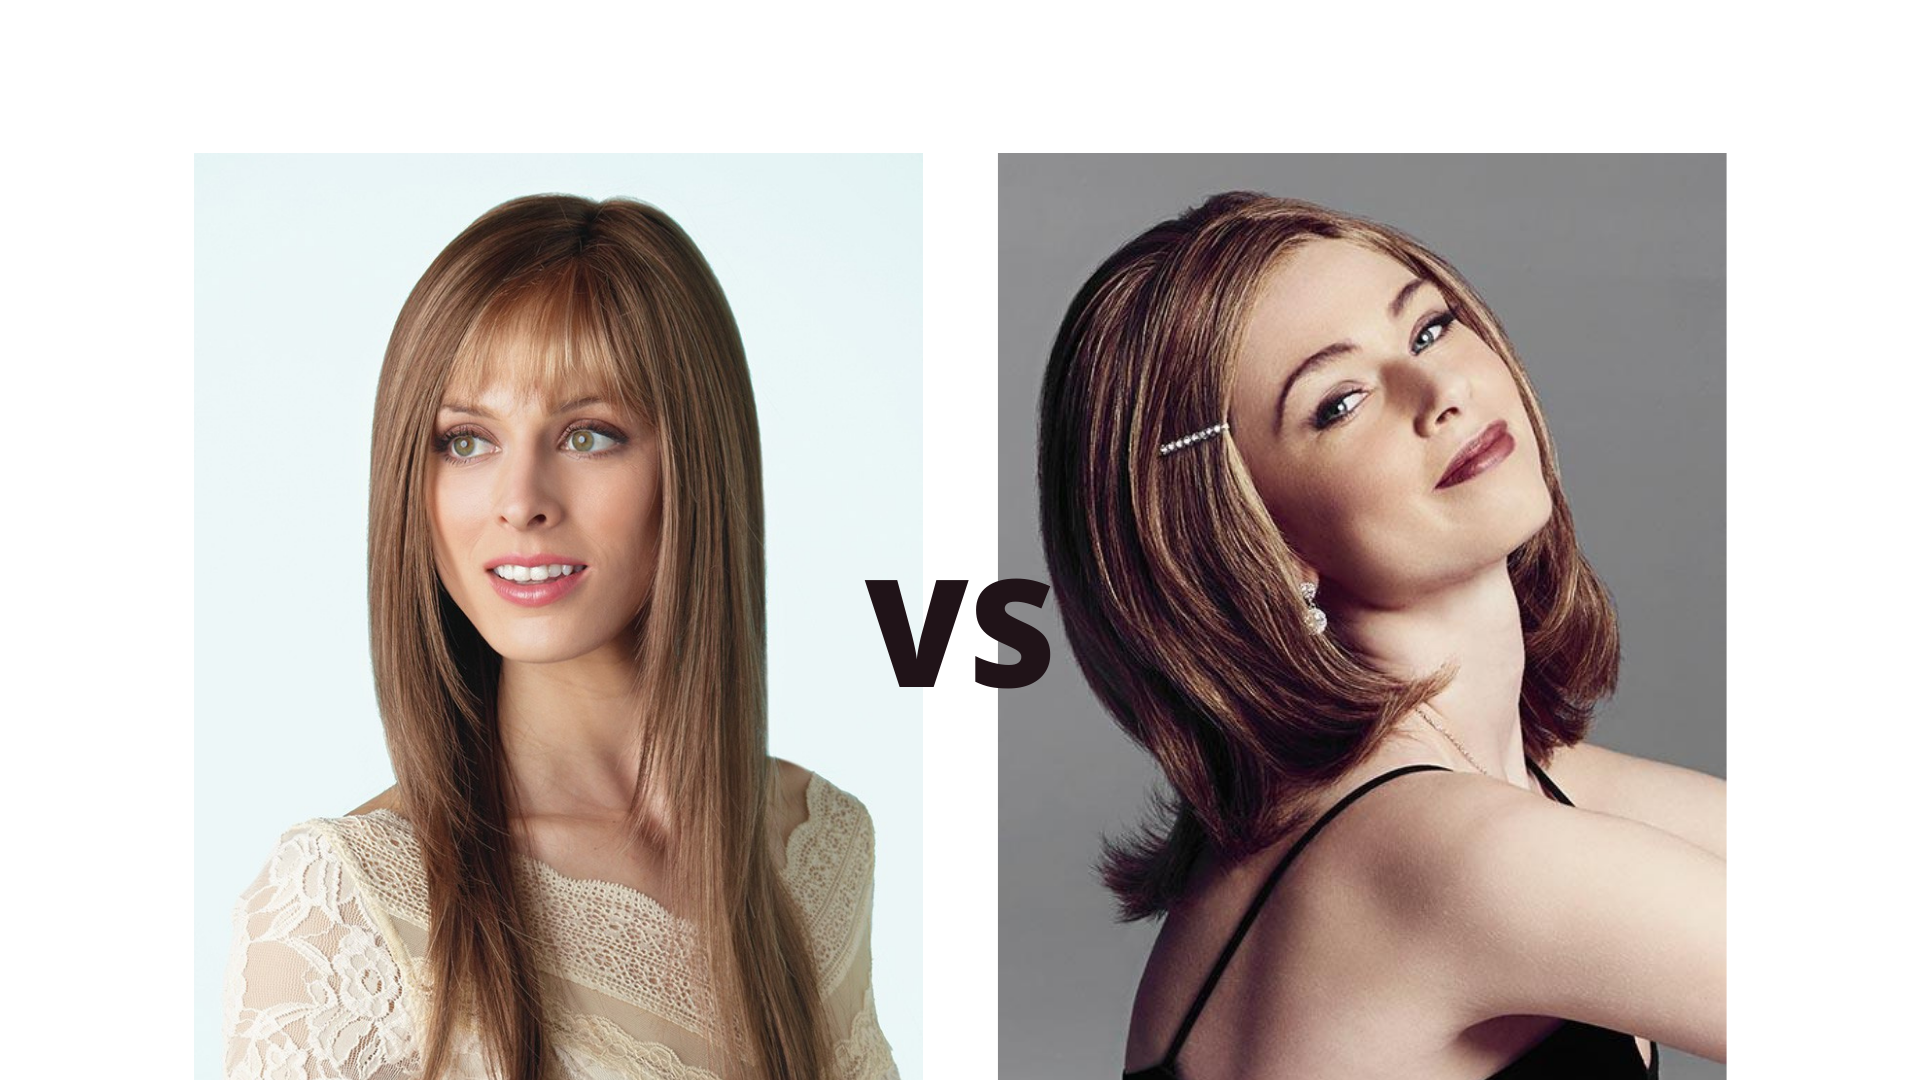 Difference Between Human Hair Wigs & Synthetic Wigs